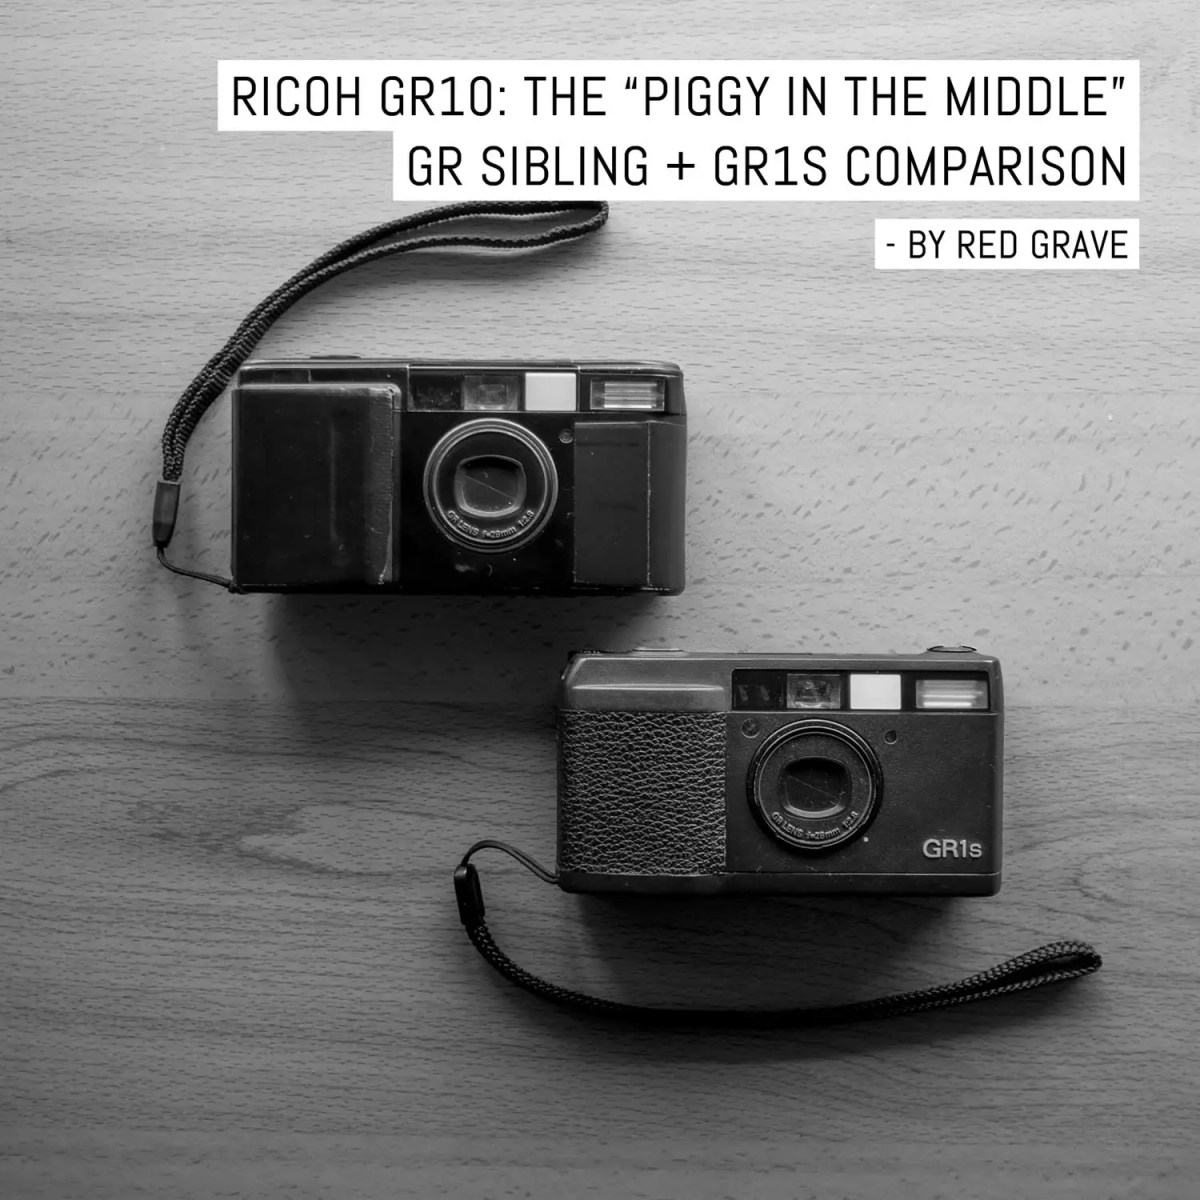 Ricoh GR10: the "piggy in the middle" GR sibling + GR1s comparison